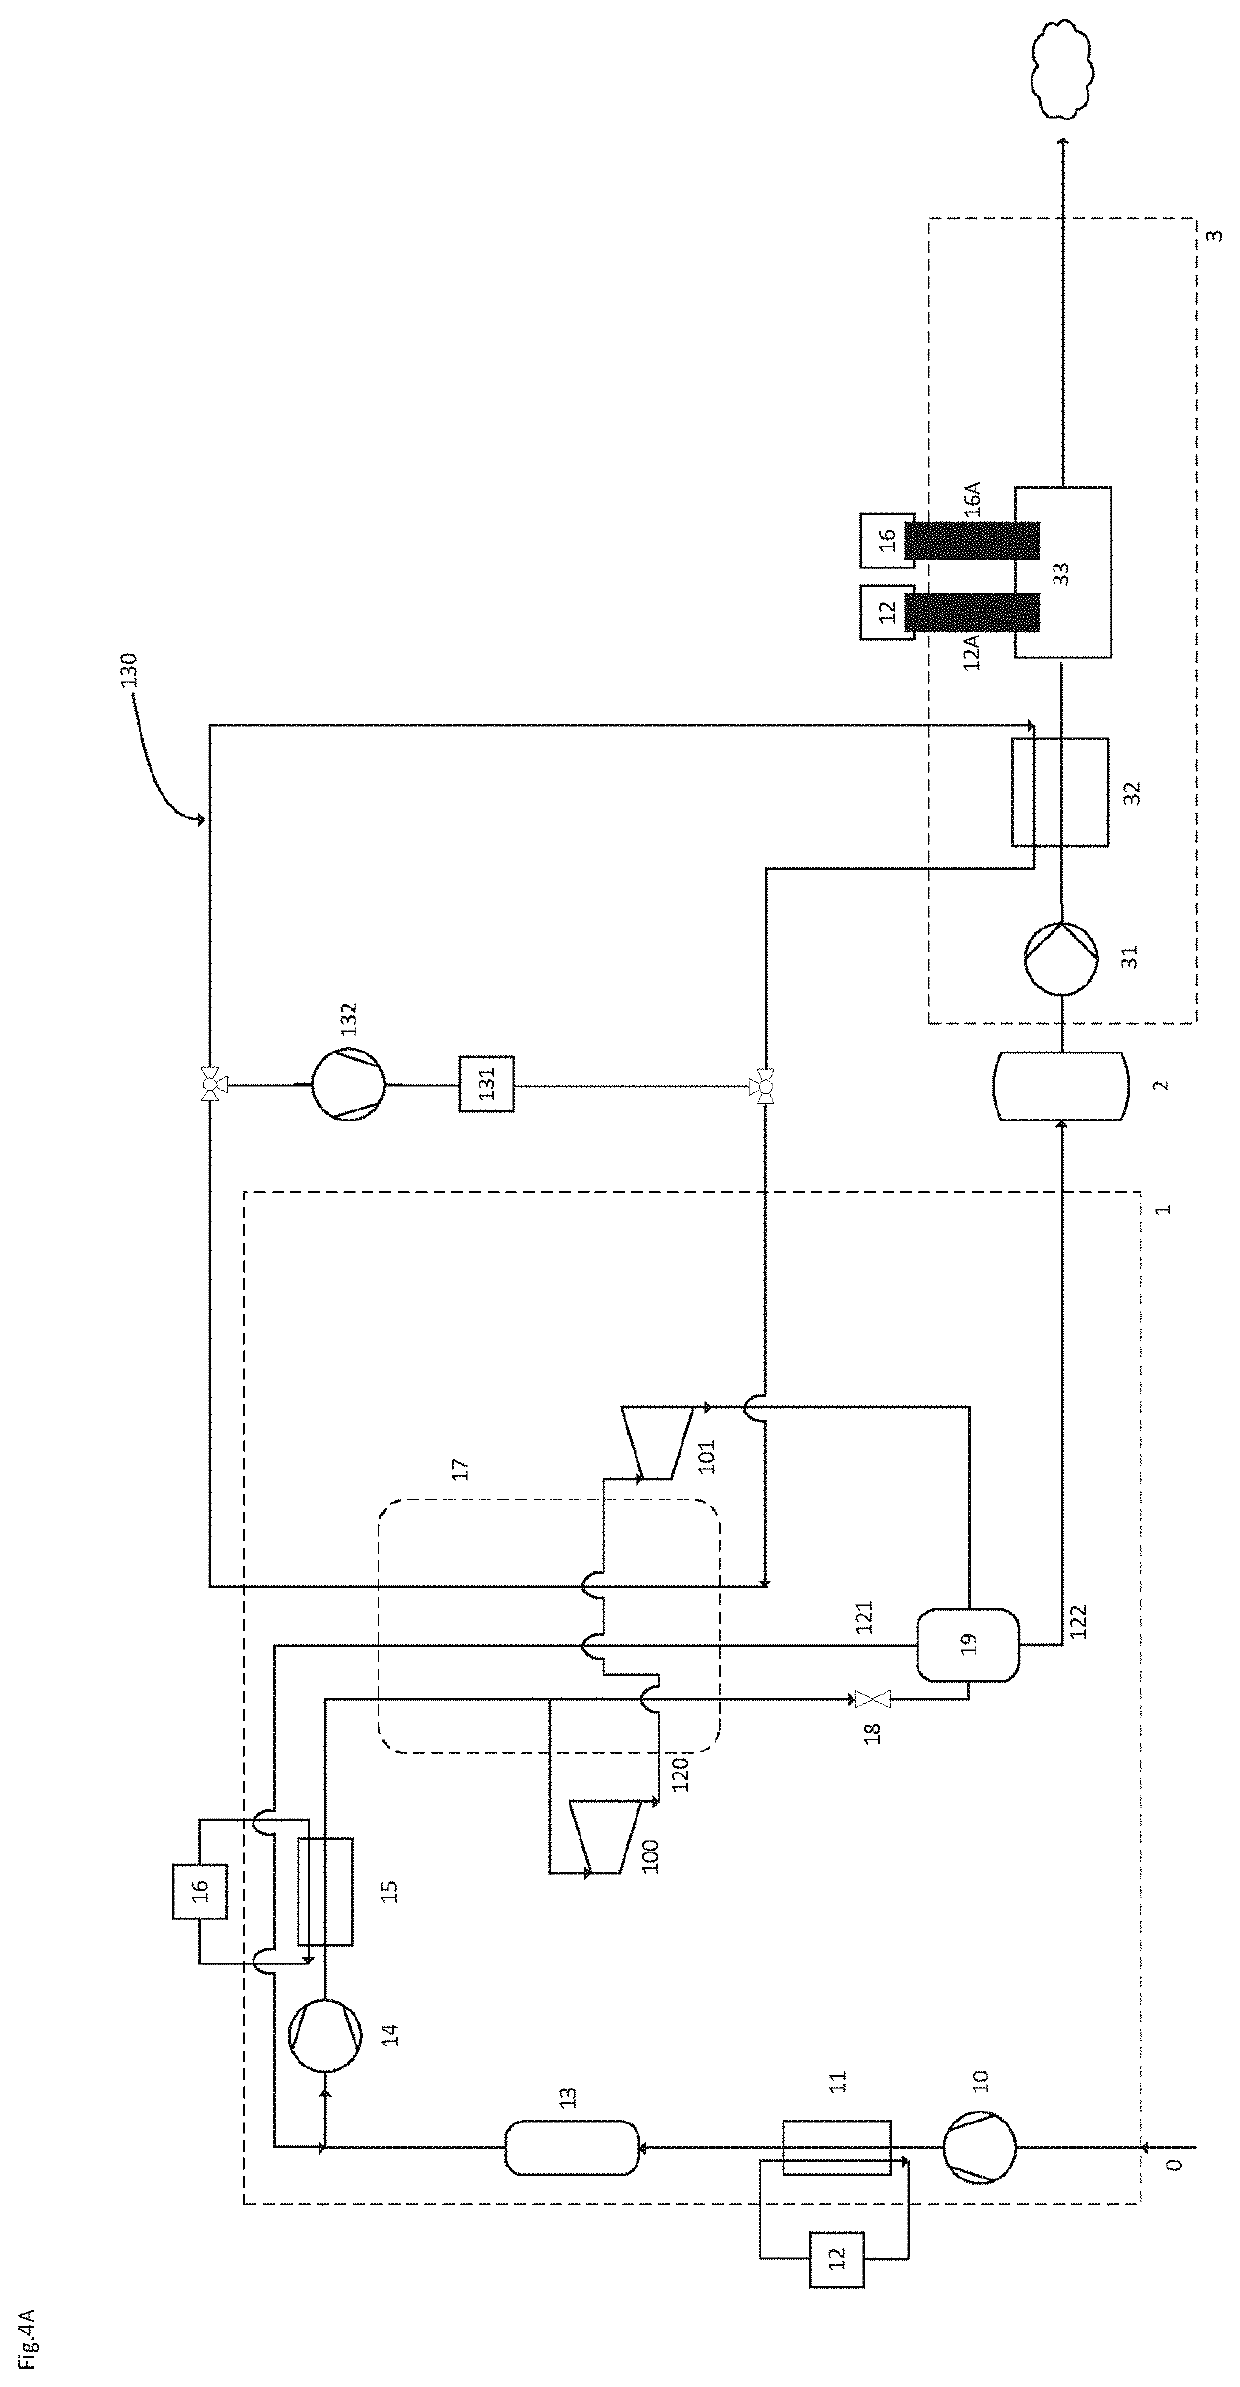 Heat-of-compression recycle system, and sub-systems thereof